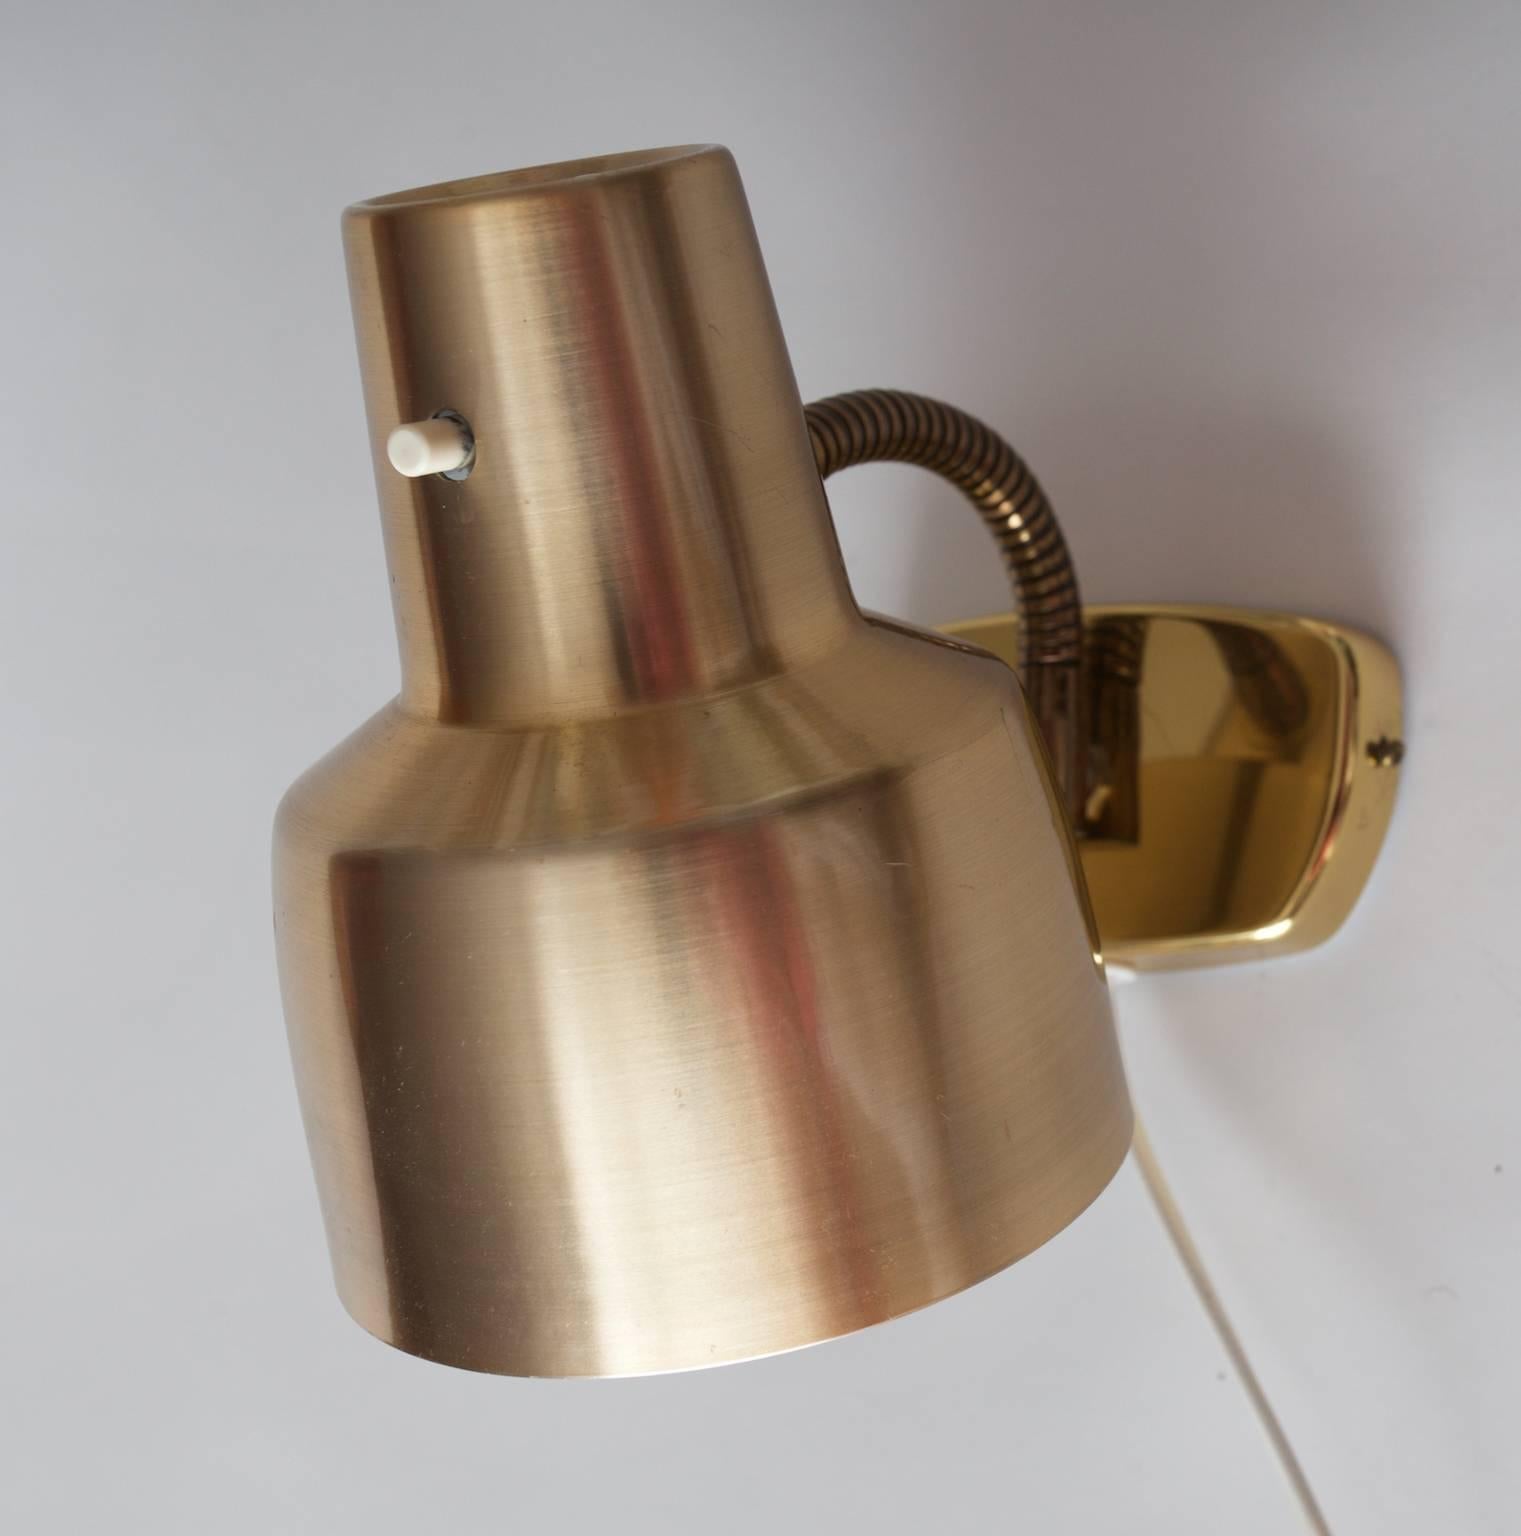 Wall lamp in brass and anodized aluminium, Sweden, 1960s from Armaturhantverk in Tibro Sweden.

The wall fitting is made of brass and the lampshade is made of aluminium.

The company was founded in 1945 and is still active as a manufacturer of